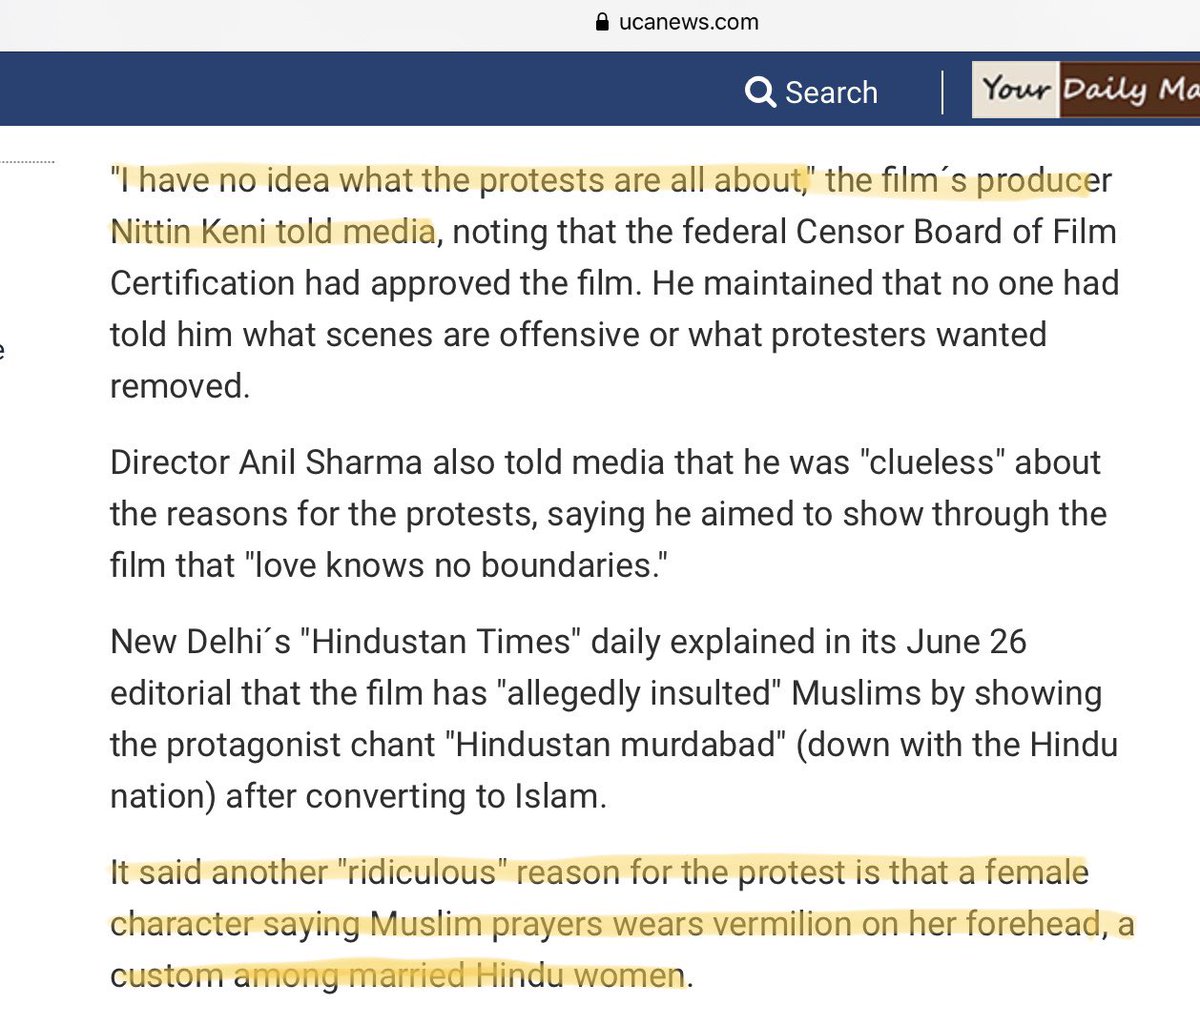 Hindus are intolerant for objecting to  @TanishqJewelry ad on social media? Let’s see.In 2001, when Gadar released, mobs threw bombs on theatres, tried to sever off a cop’s arm, burnt vehicles and screens. One of the major reasons was sindoor put on Muslim woman